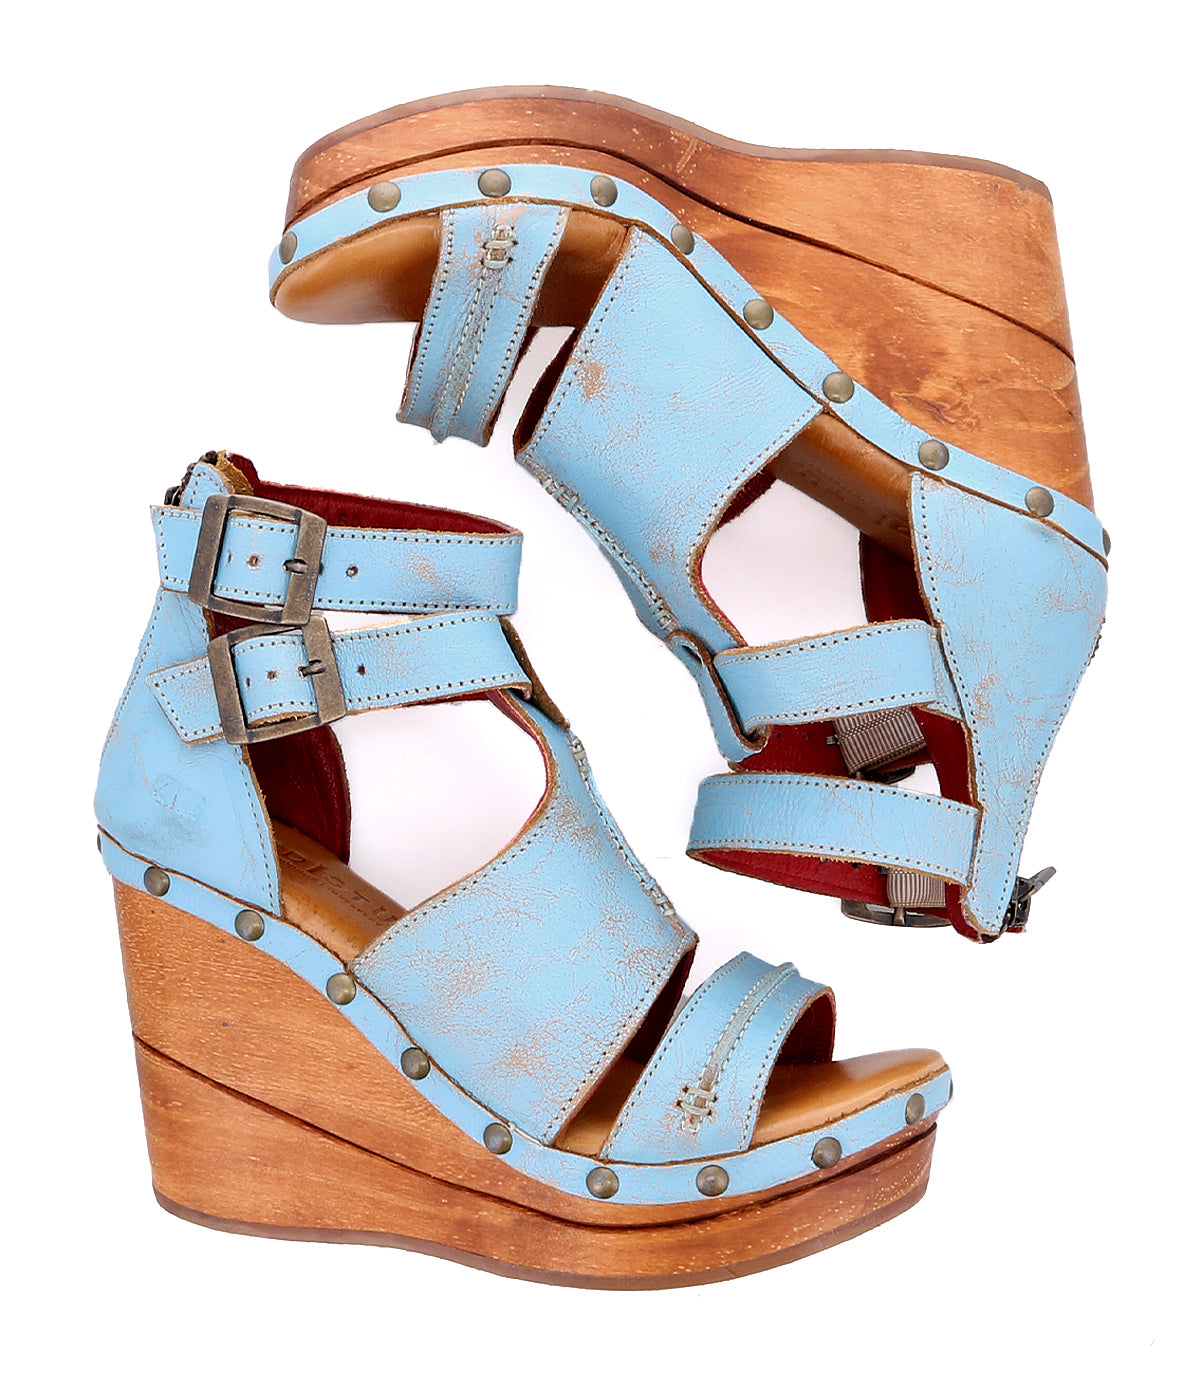 A pair of blue wedge sandals, the Princess sandals by Bed Stu, with sustainable wooden straps and woven strappy uppers.